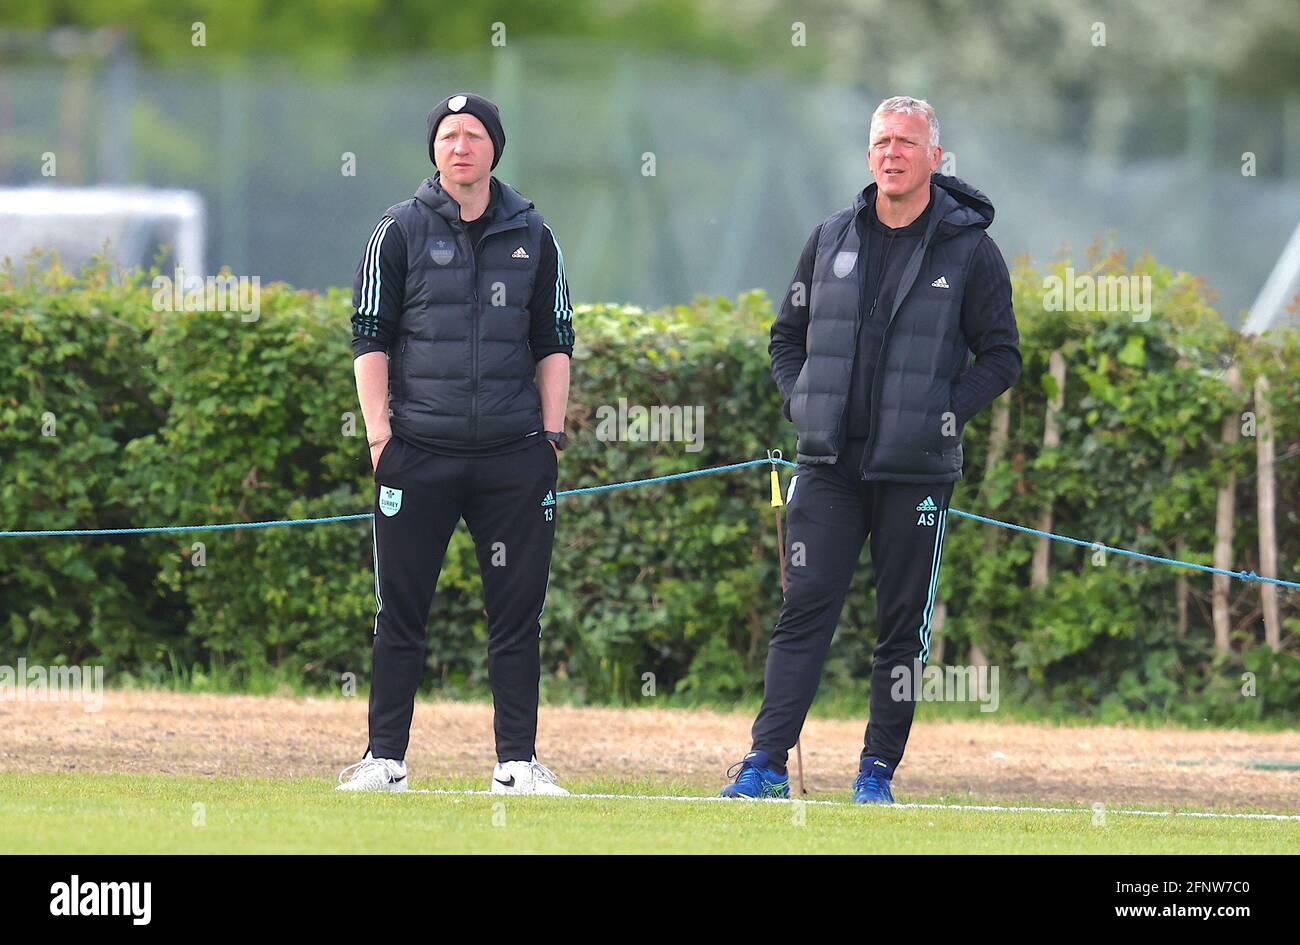 Gareth Batty and Alex Stewart watching as Surrey take on Hampshire in the 2nd XI match at New Malden, day two. David Rowe/Alamy Live News Stock Photo